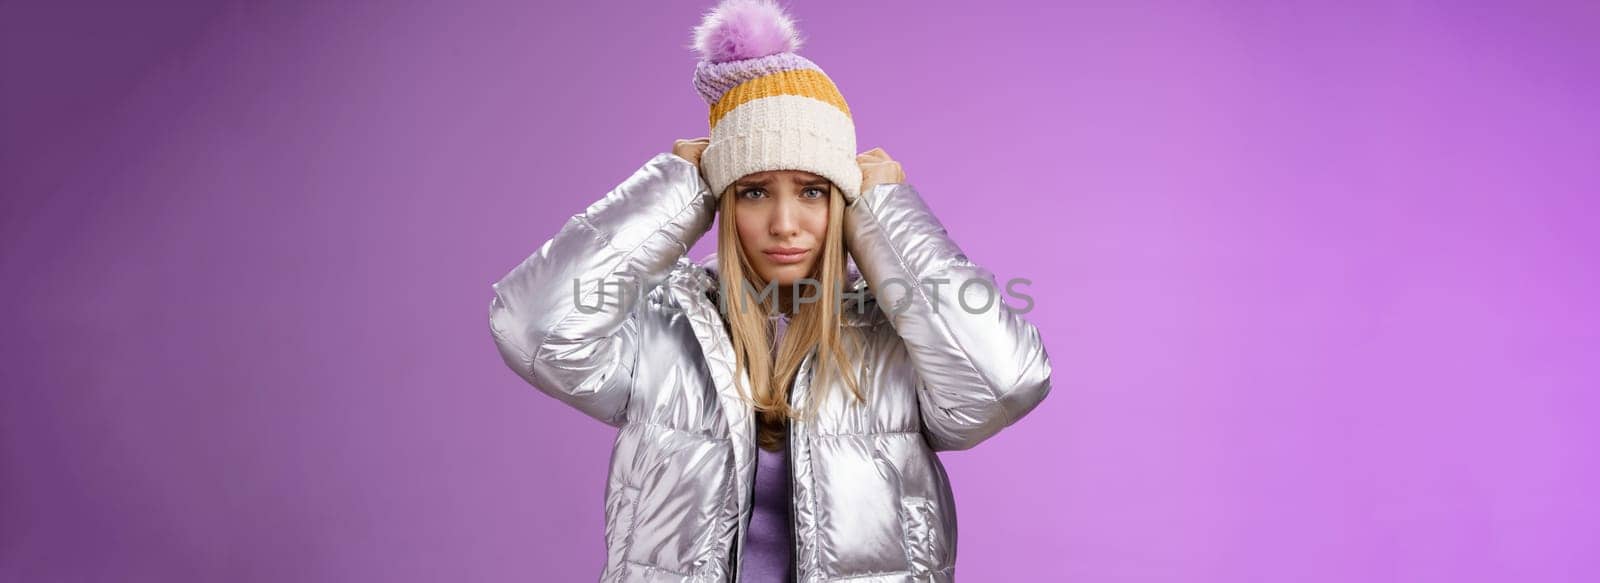 Upset gloomy complaining blond girlfriend whining standing upset disappointed sulking offended pulling hat forehead look offended unhappy wearing stylish glittering jacket unwilling go outside cold.